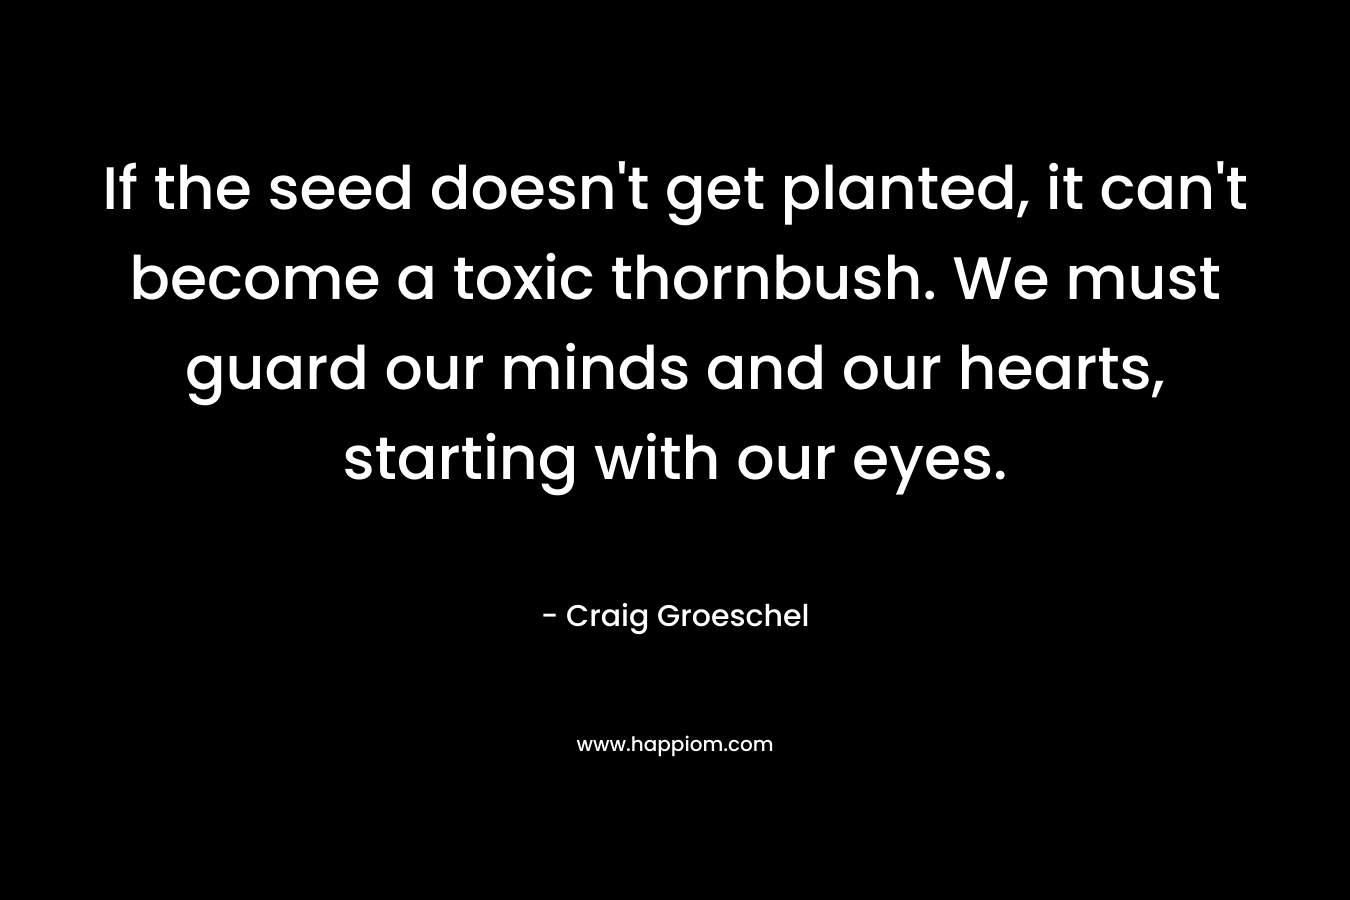 If the seed doesn’t get planted, it can’t become a toxic thornbush. We must guard our minds and our hearts, starting with our eyes. – Craig Groeschel